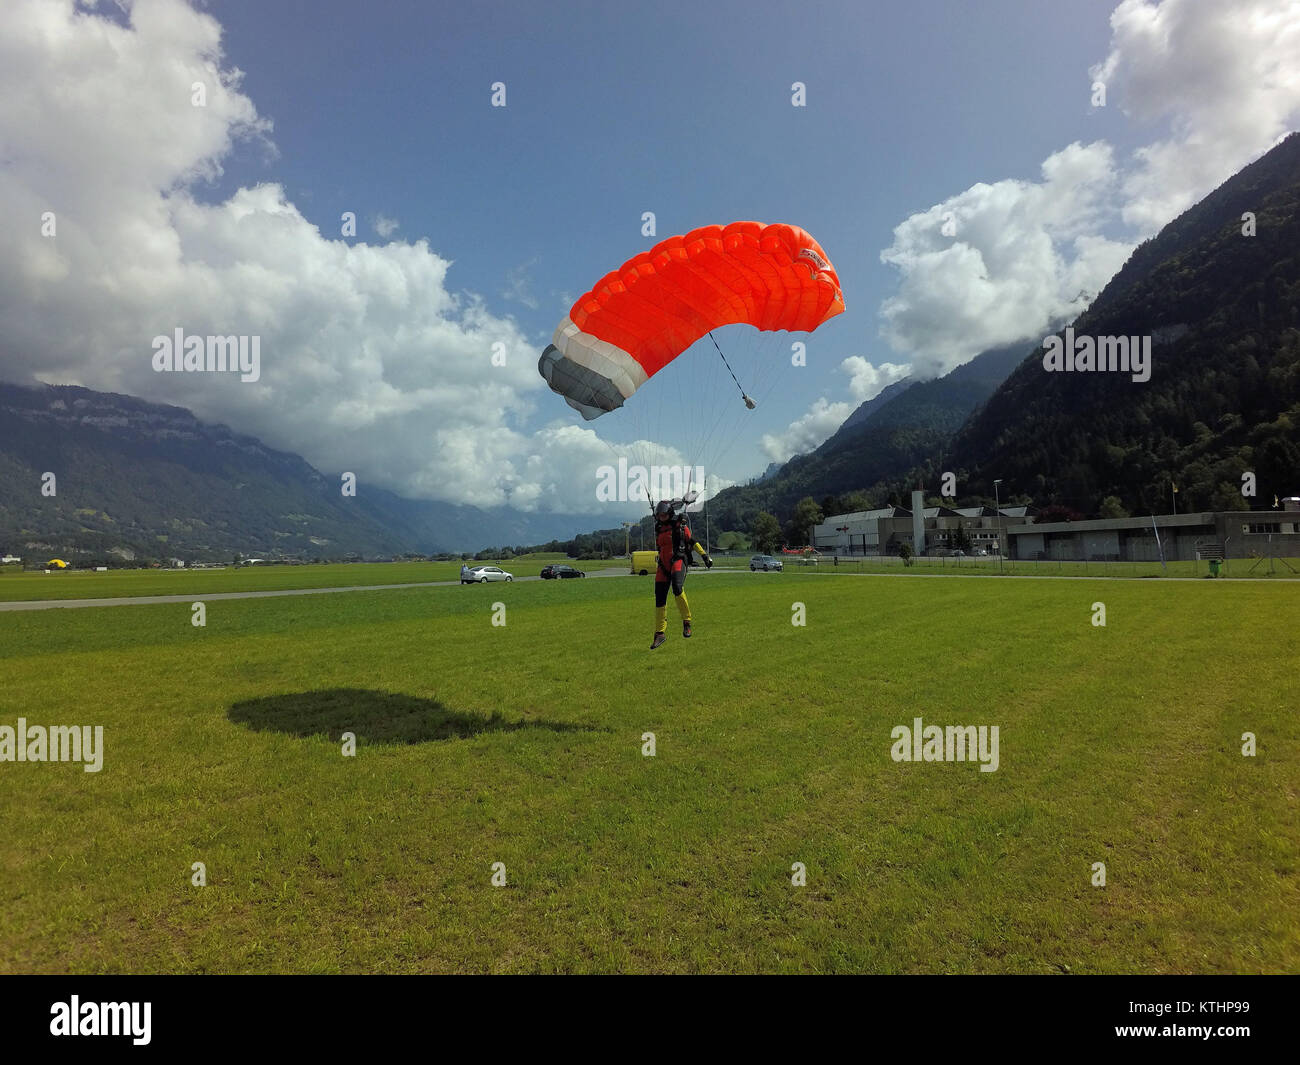 Parachuter under canopy is landing save on the dedicated grass area. She has a big smile on her face after this skydive jump. Stock Photo